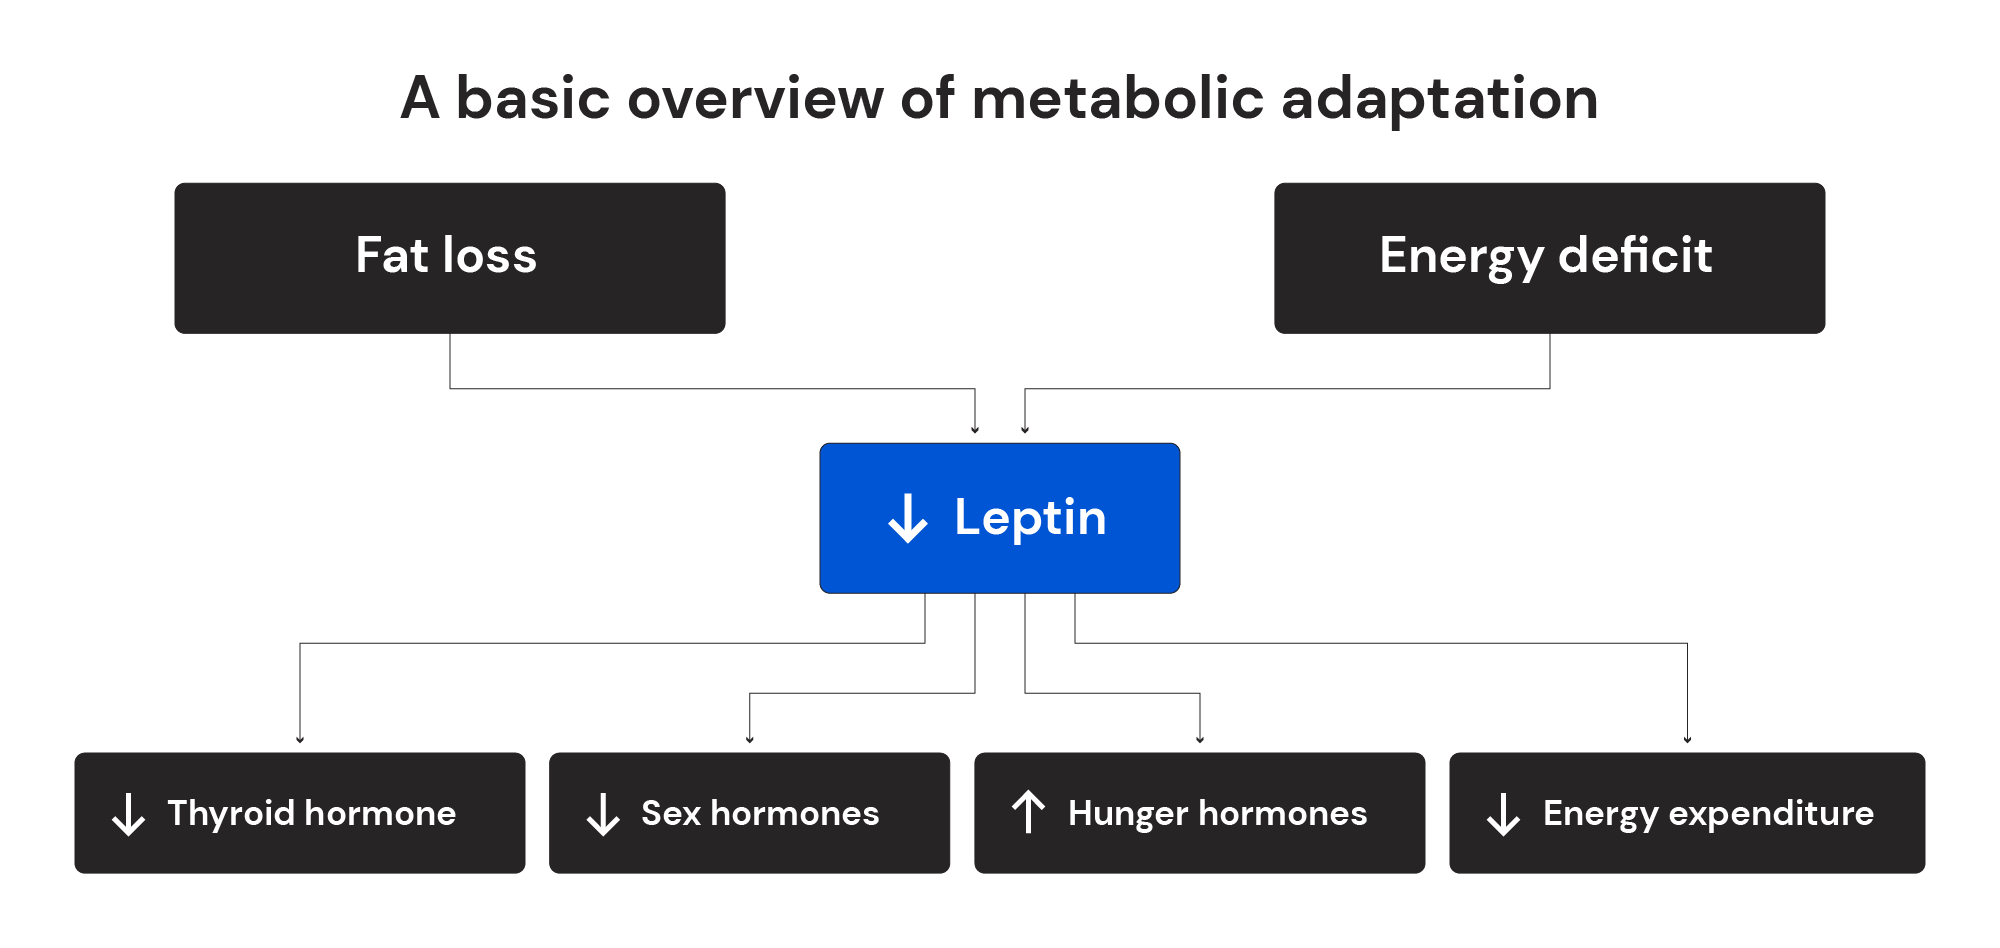 A basic overview of metabolic adaptation